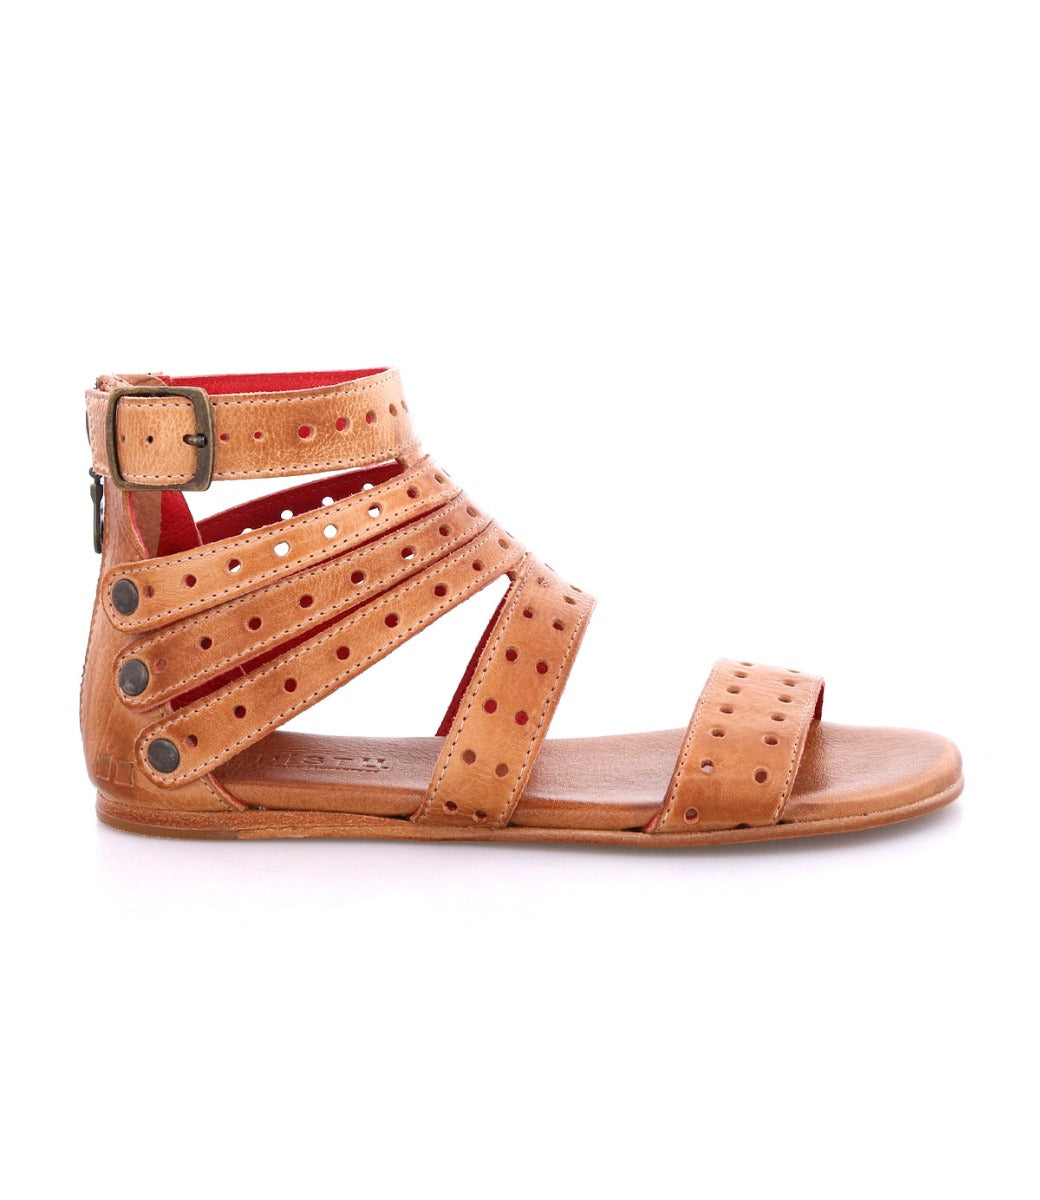 A women's tan gladiator sandal with straps, the Artemis M by Bed Stu.